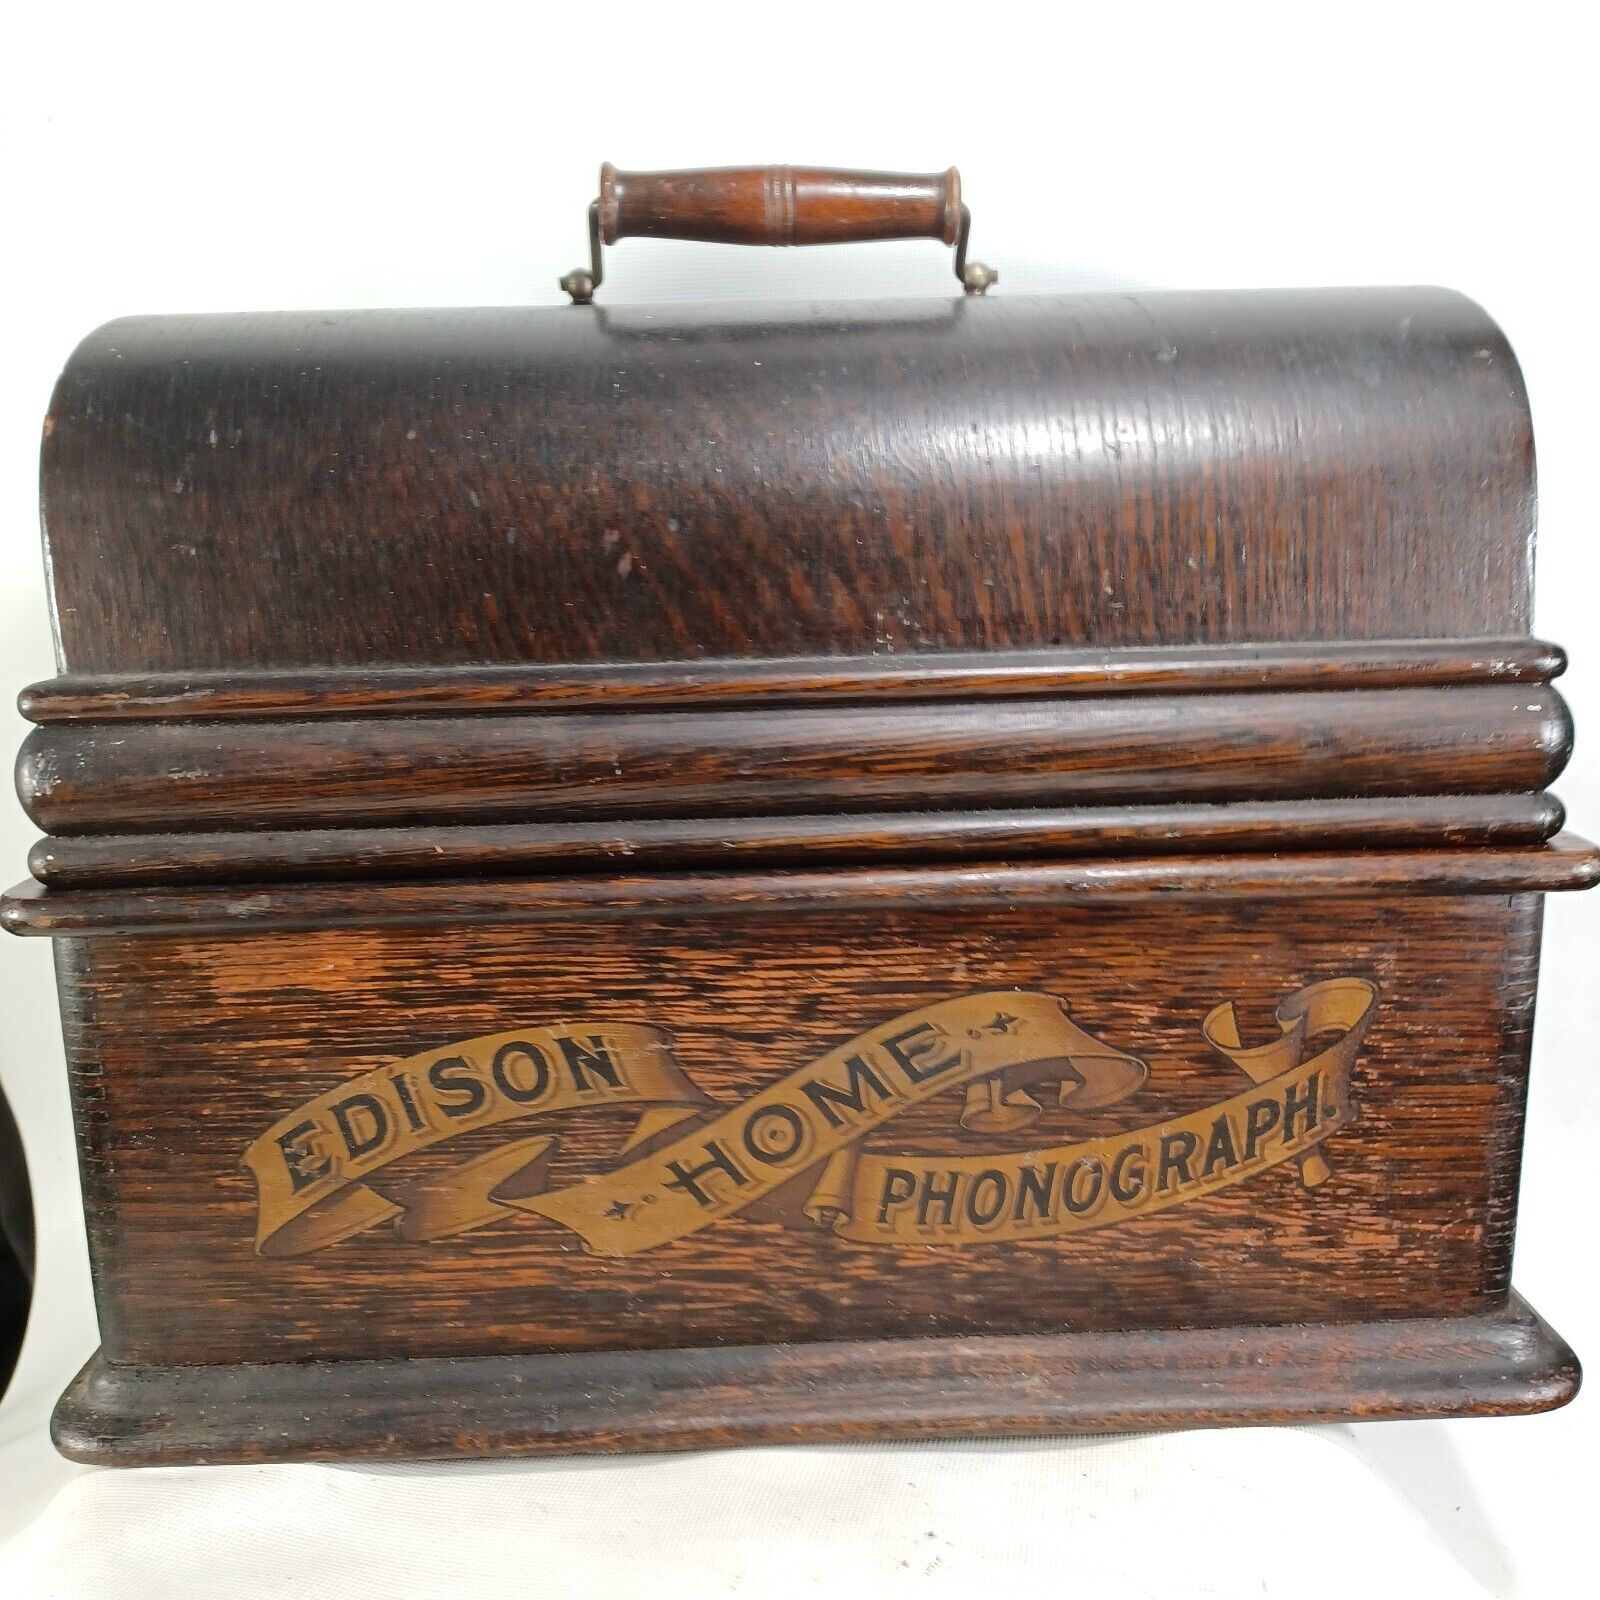 Antique Edison Cylinder Home Phonograph with Wood Case